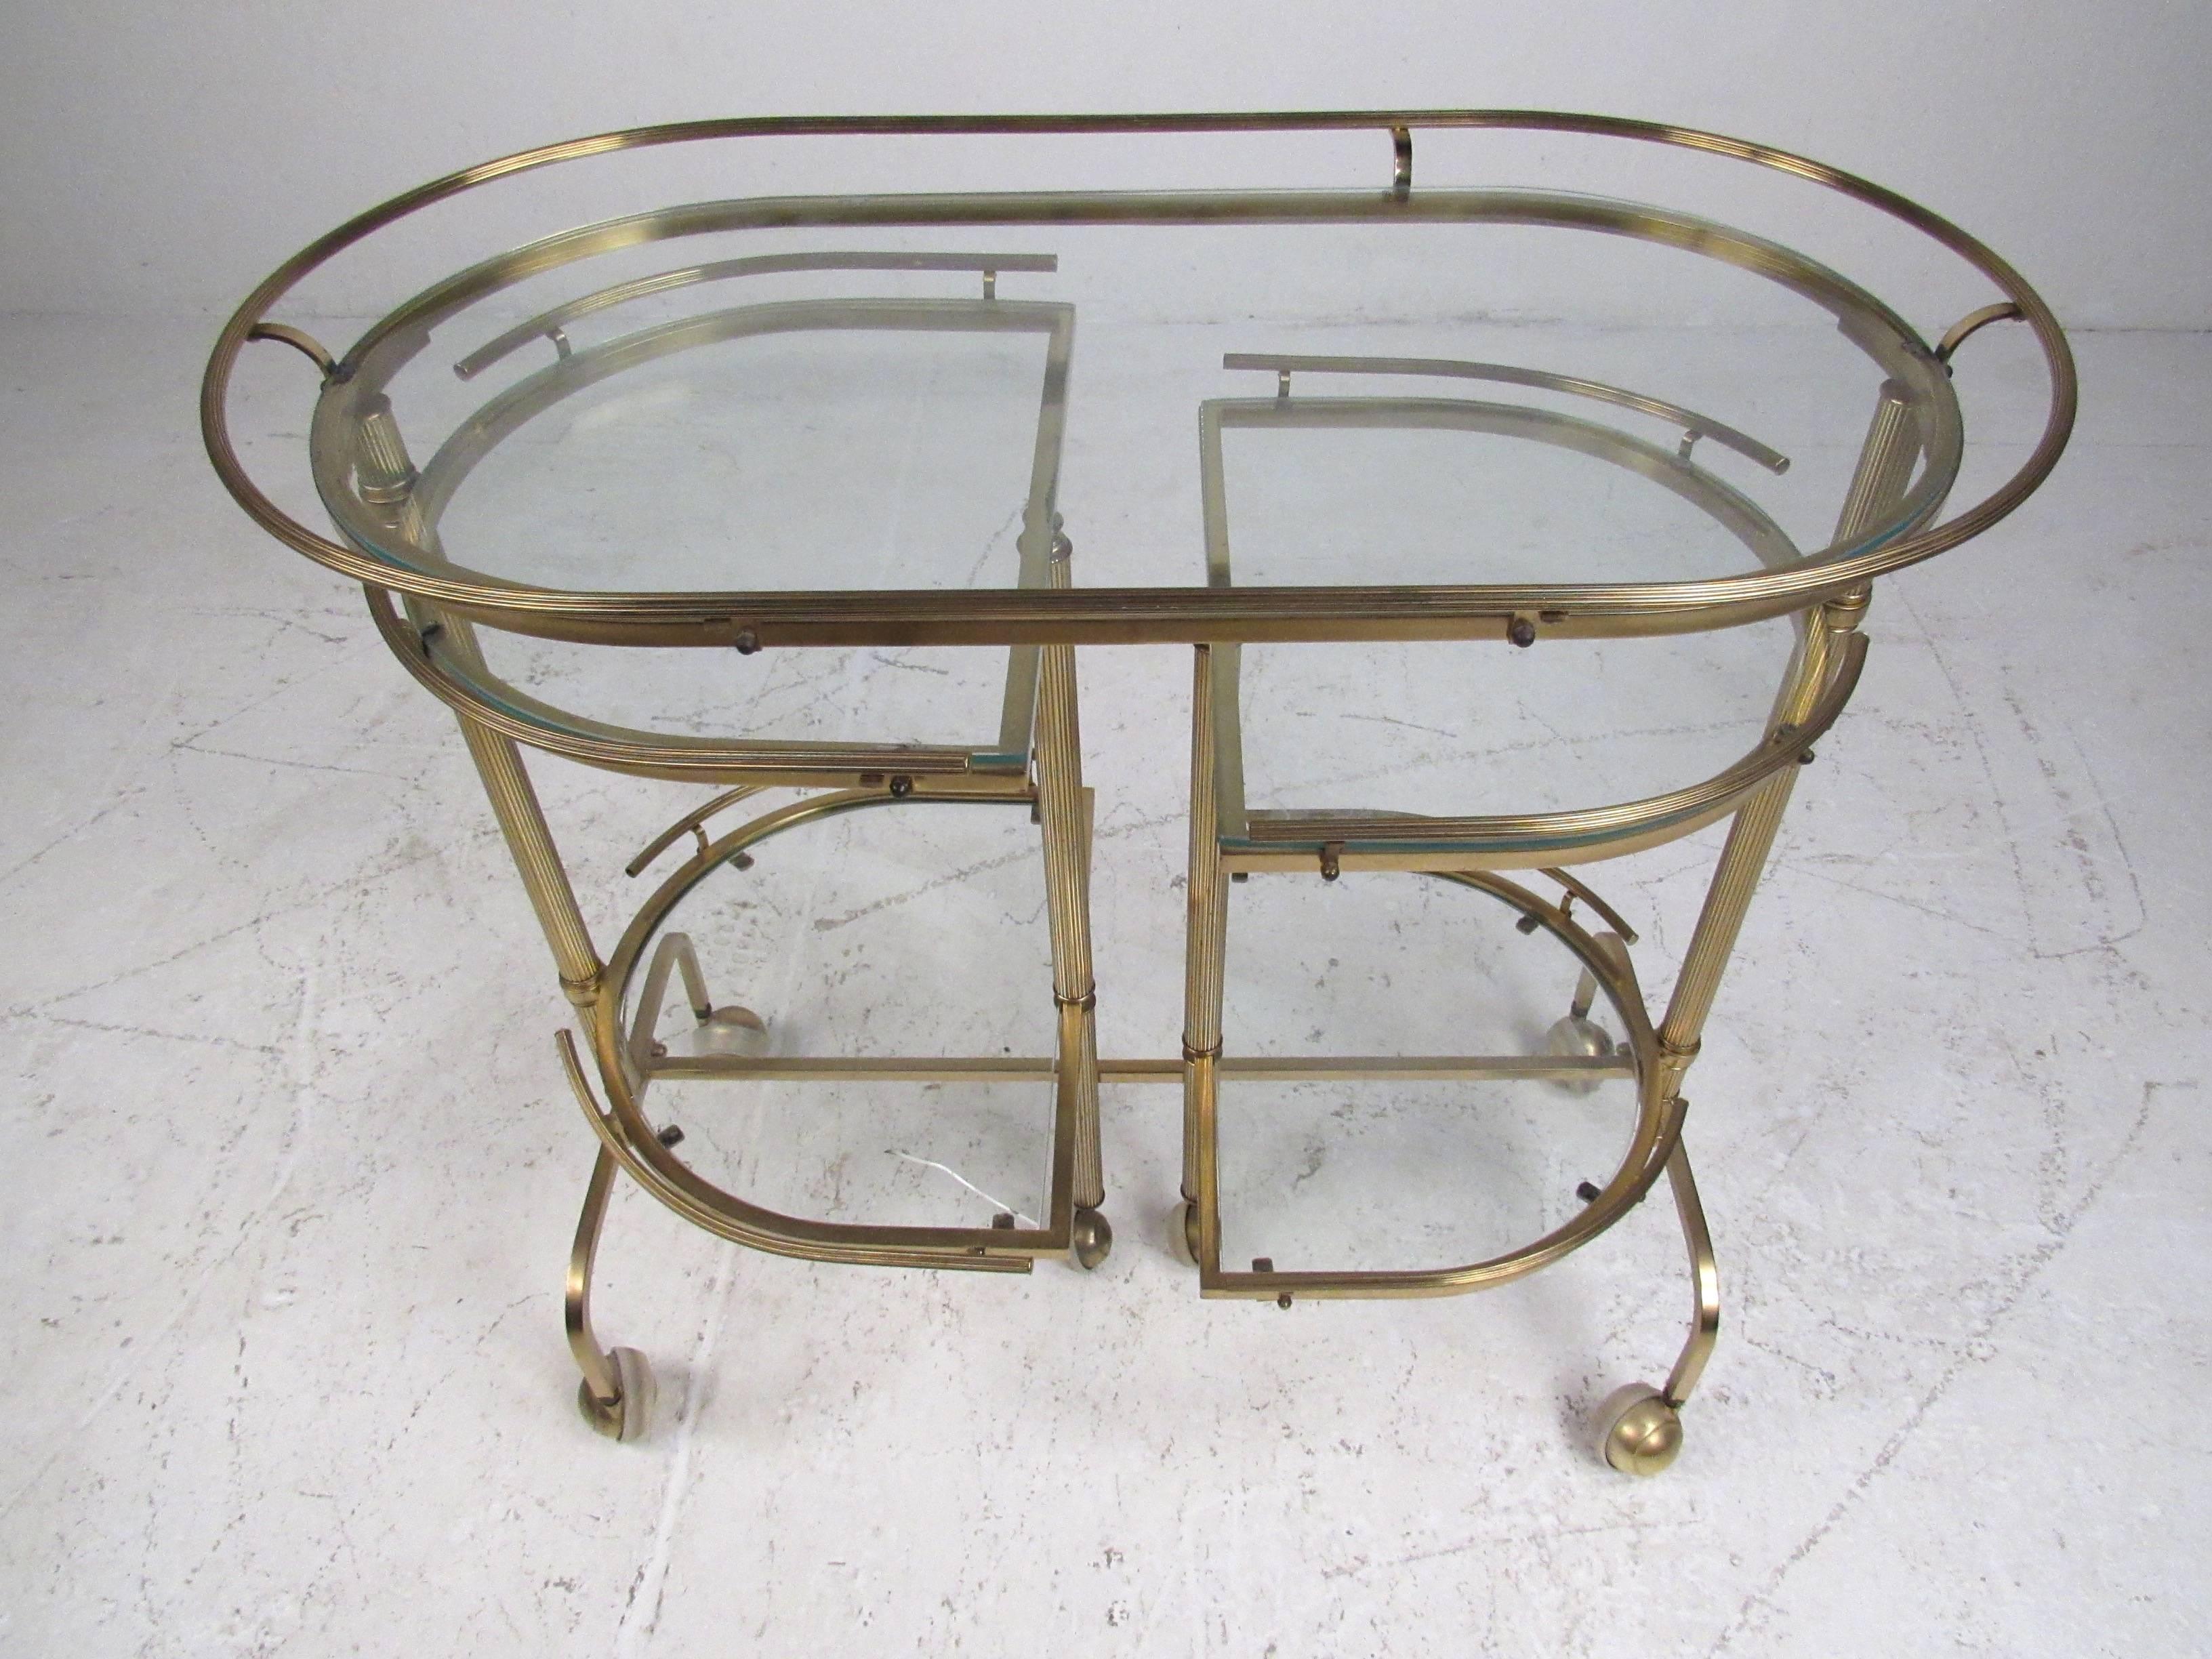 Unusual three-tier service/bar cart with fluted rails and glass shelves that swivel to open at various positions revealing five surfaces for optimum usage. Fully extended the cart measures 56